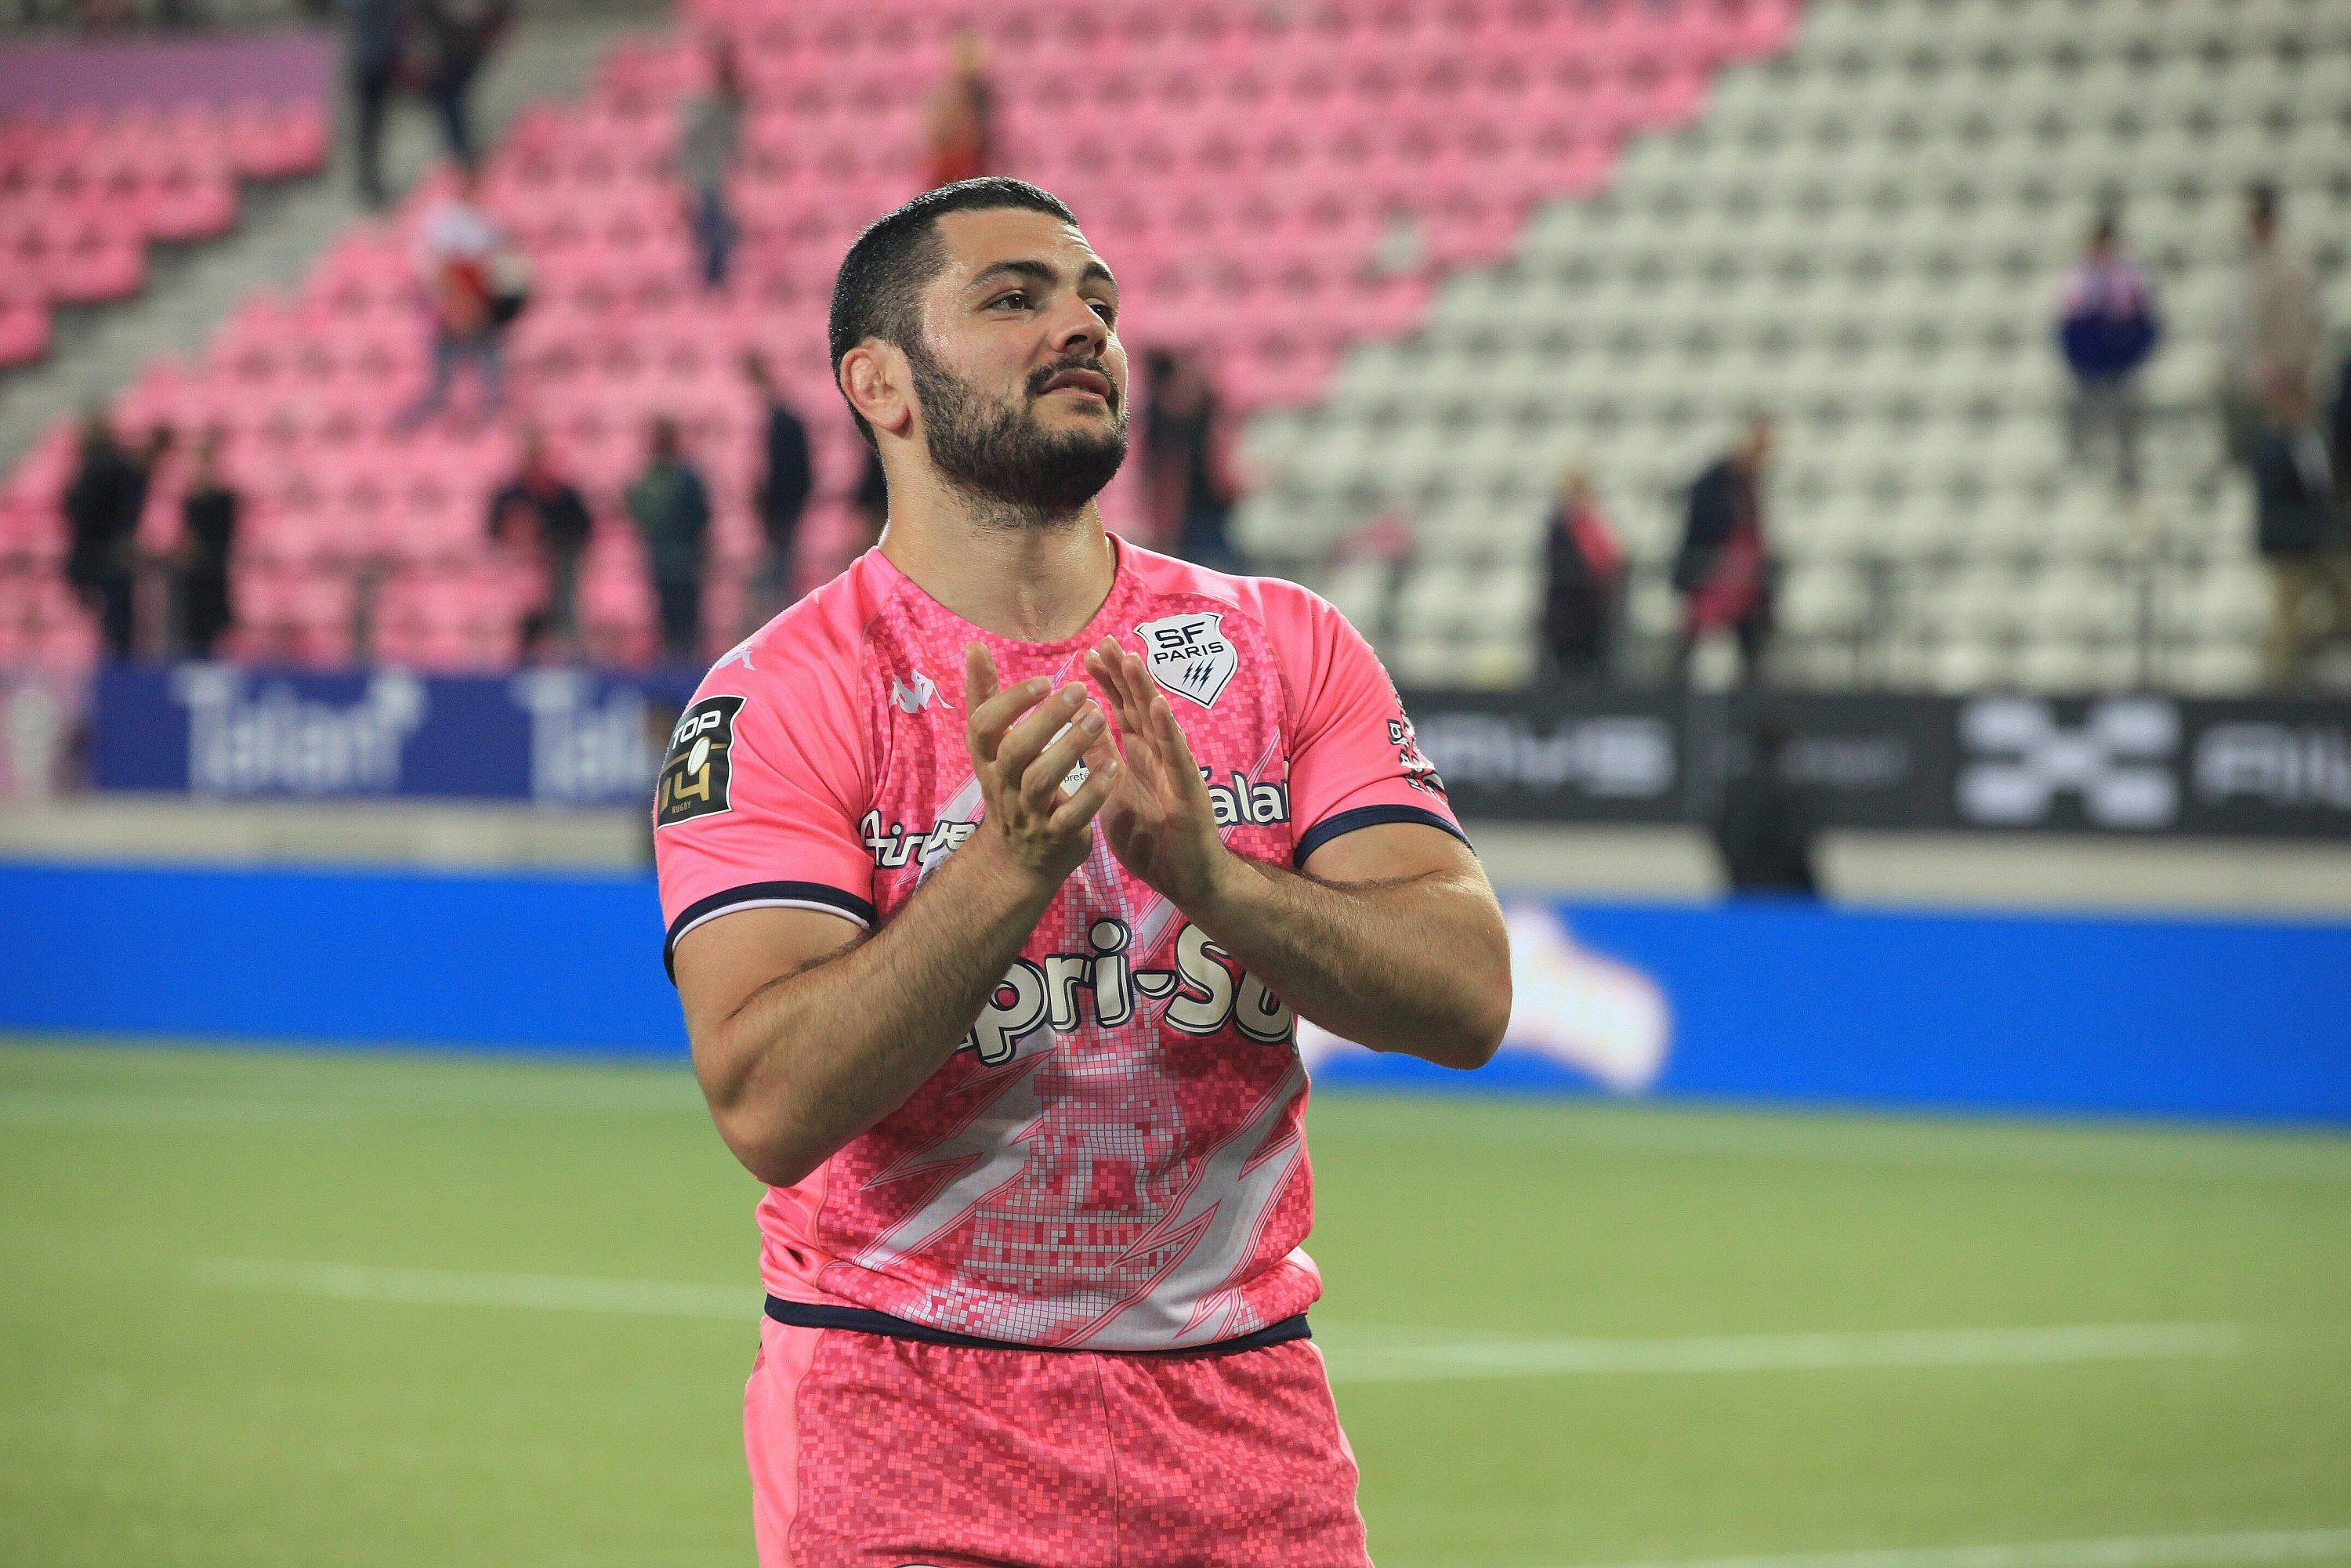 Top 14: Laurent Panis (Stade français) will retire at the end of the season